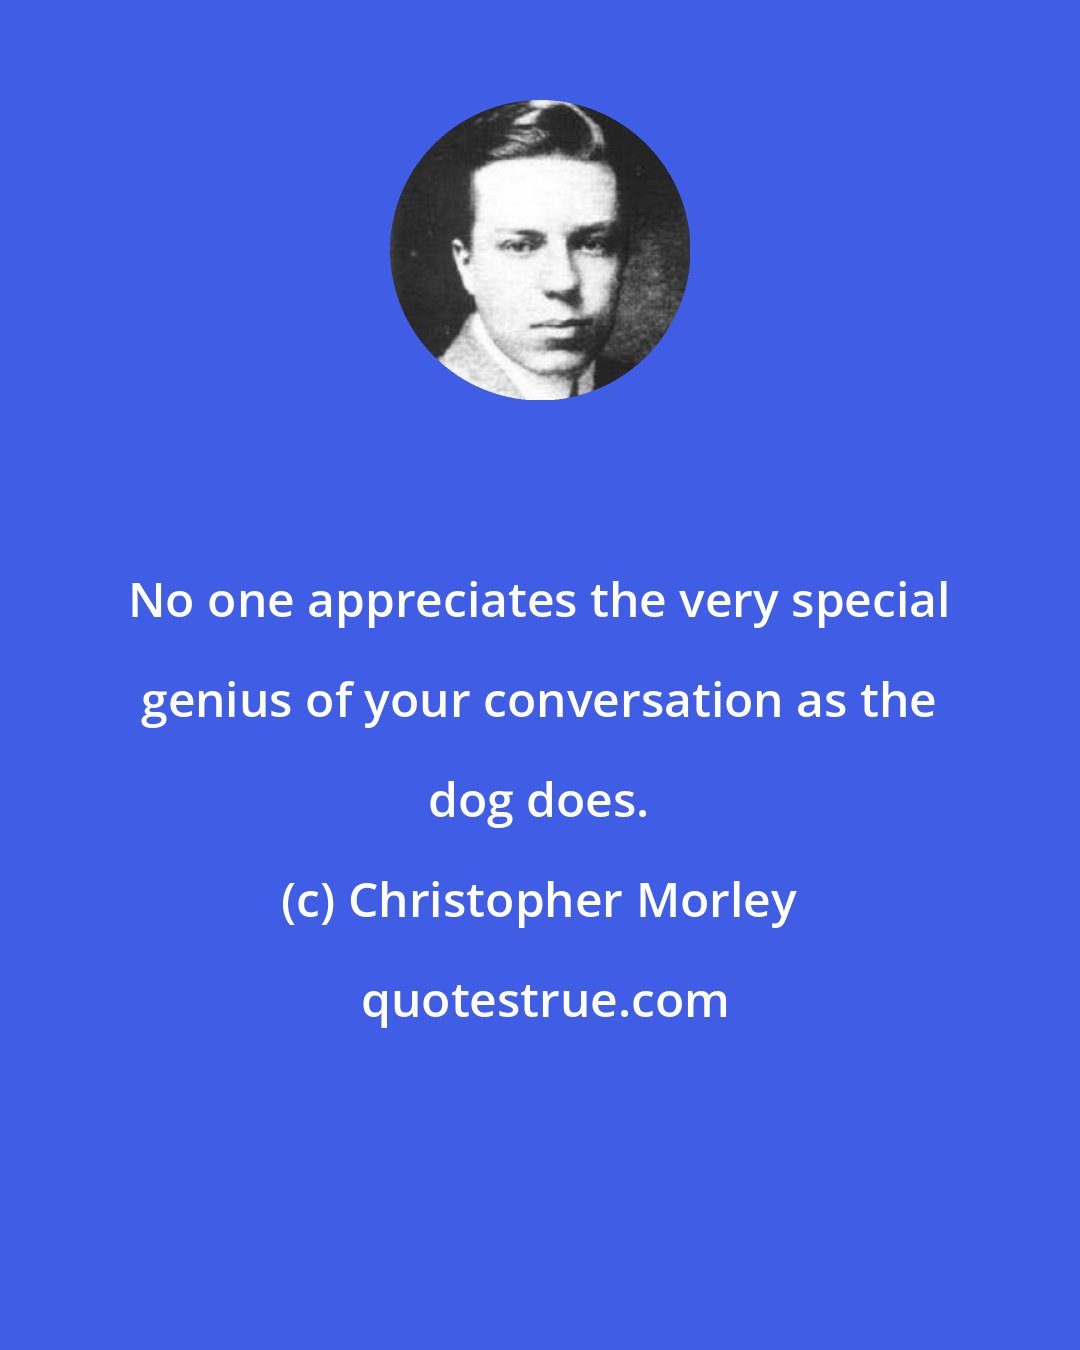 Christopher Morley: No one appreciates the very special genius of your conversation as the dog does.